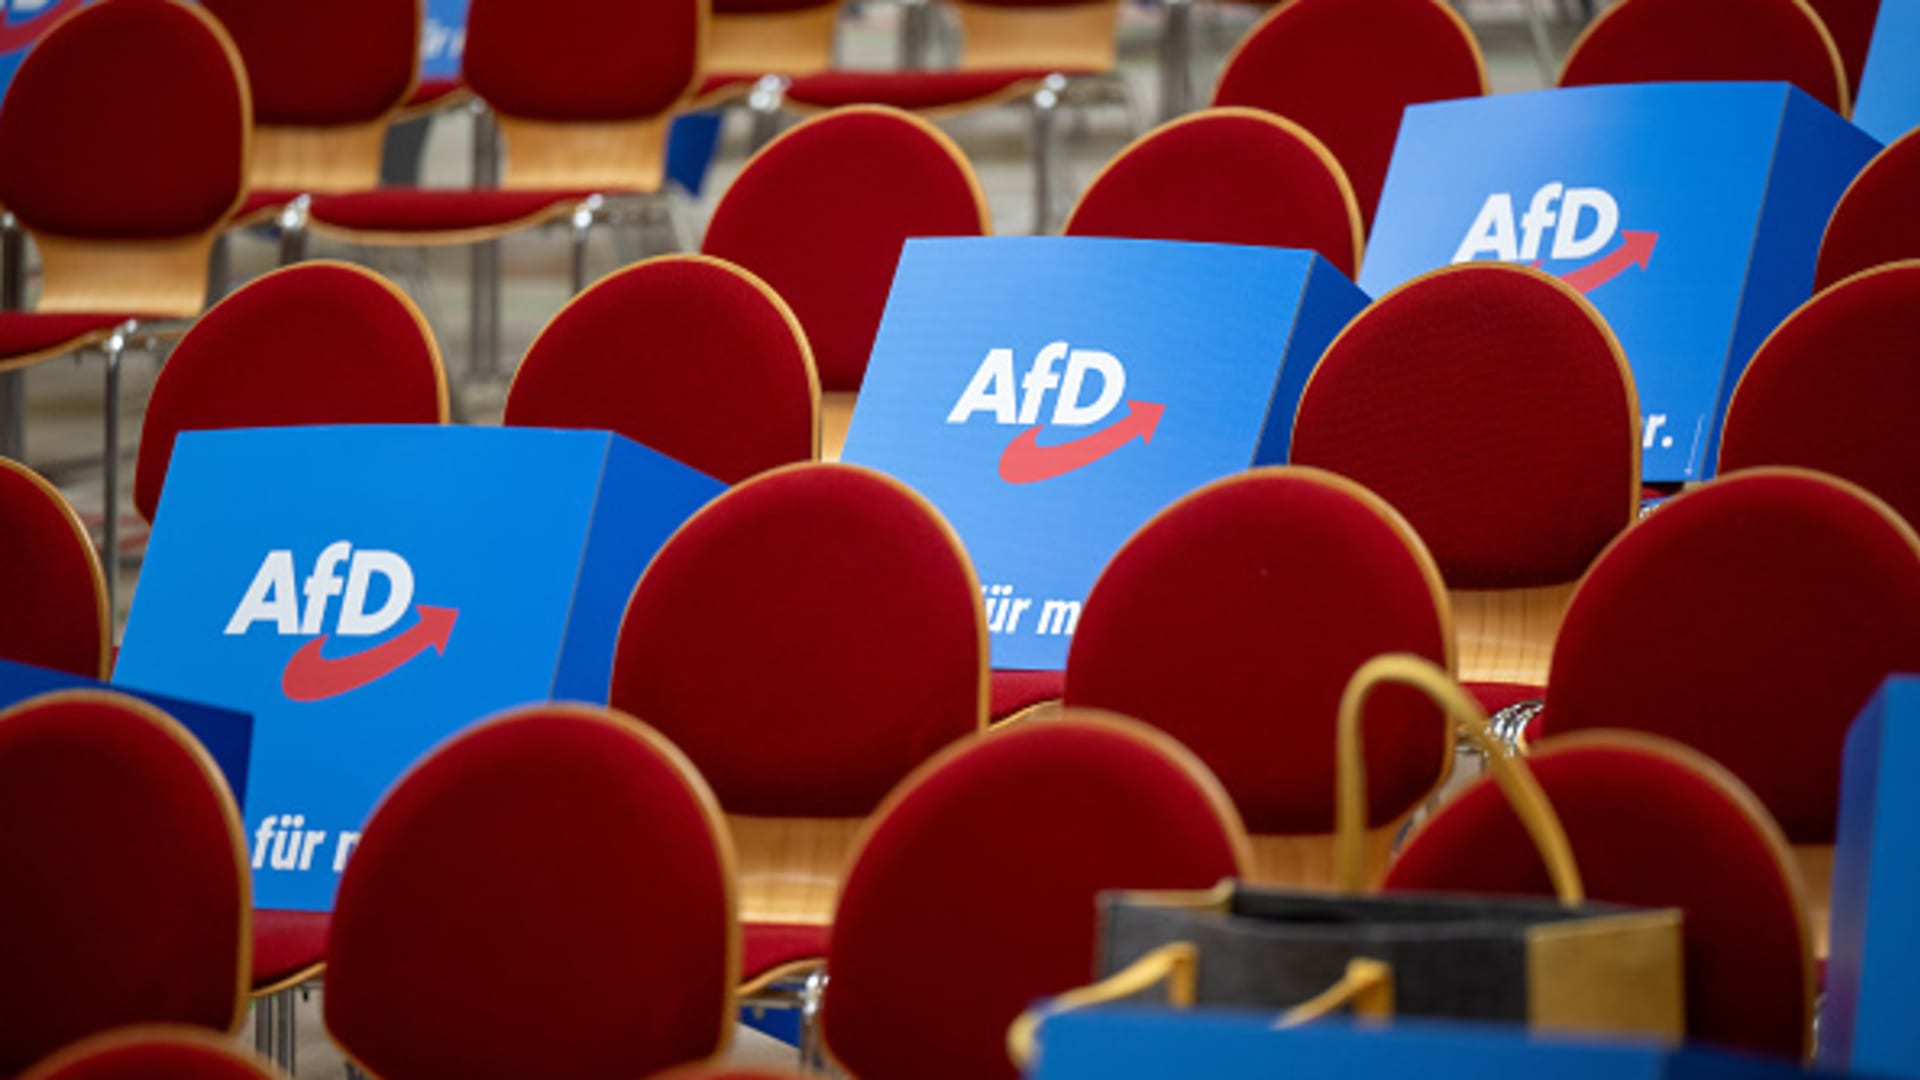 Germany’s far-right AfD party is finding success on TikTok — as its popularity among young voters grows